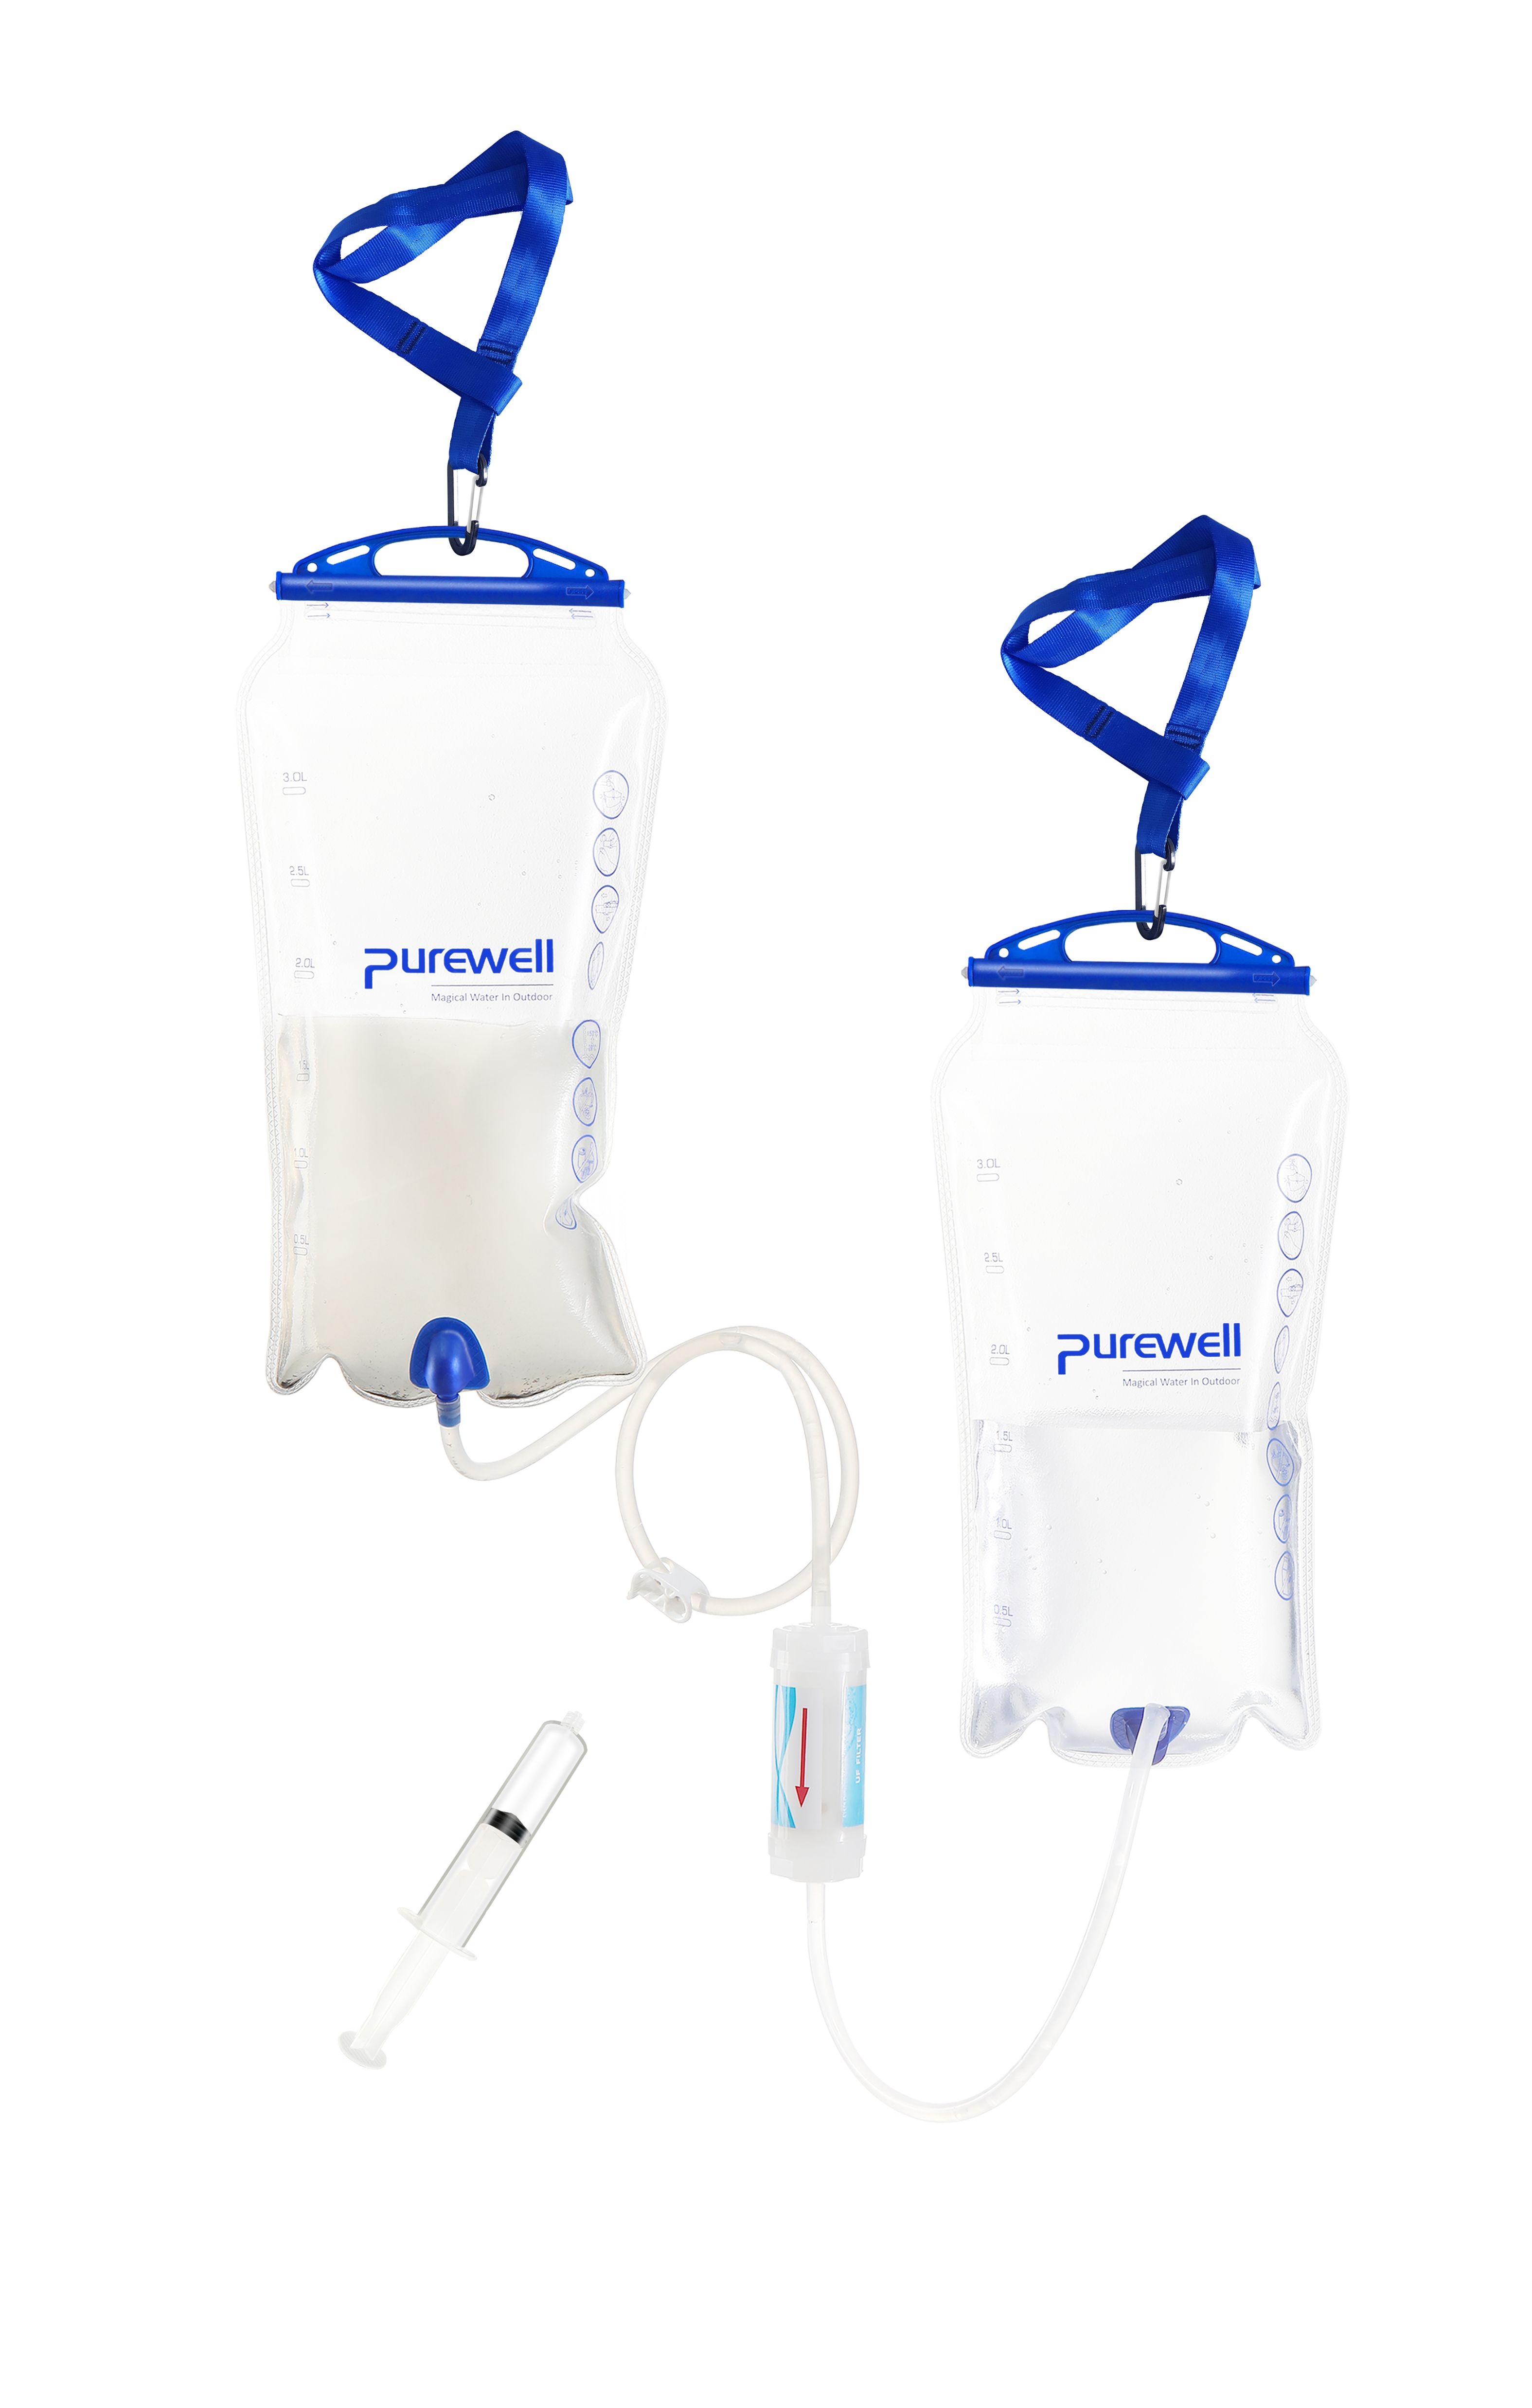 Purewell Array image223